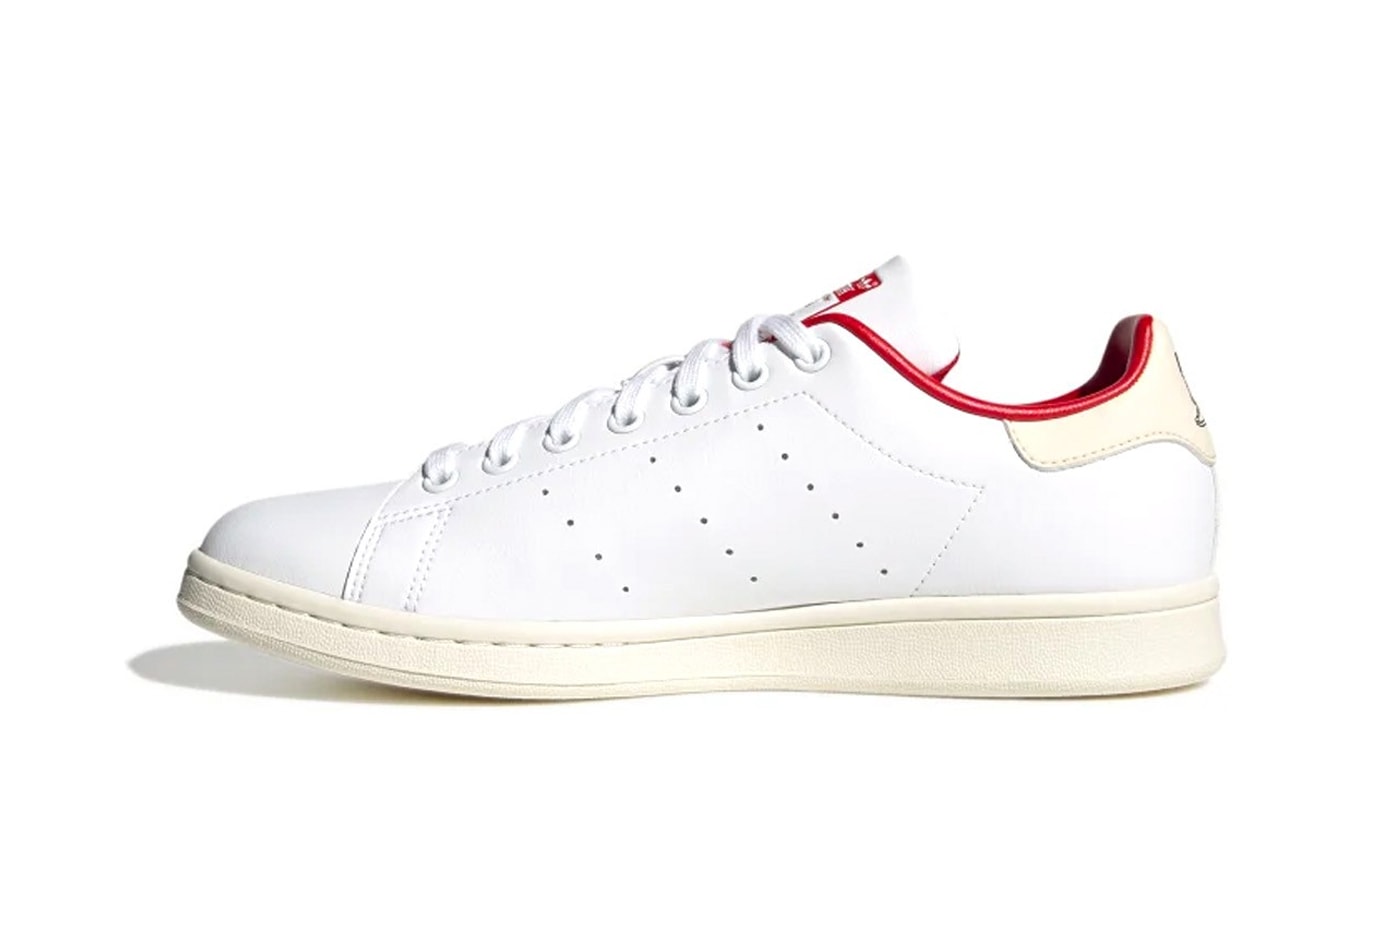 adidas Stan Smith Christmas GY1911 Release Information sneakers footwear holiday hype